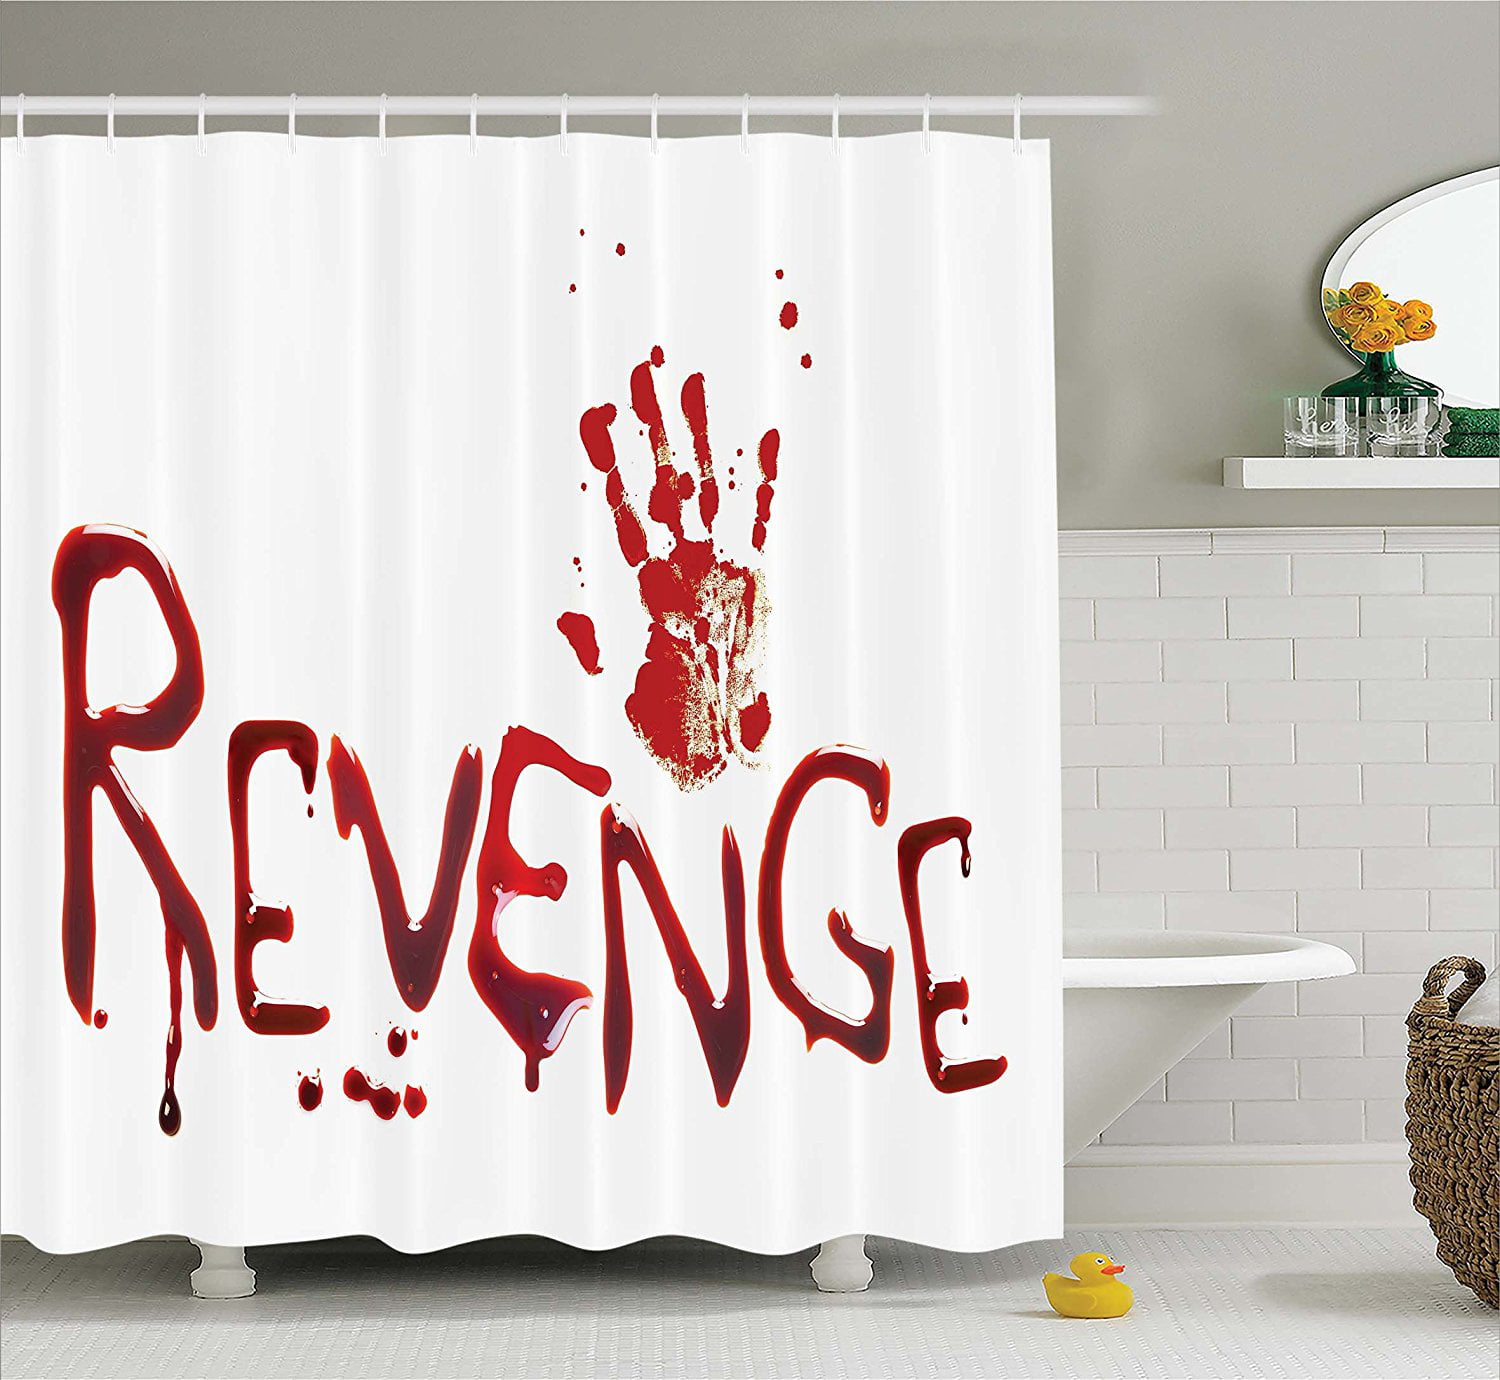 Shower Curtain Set By, Shower Curtain Blood